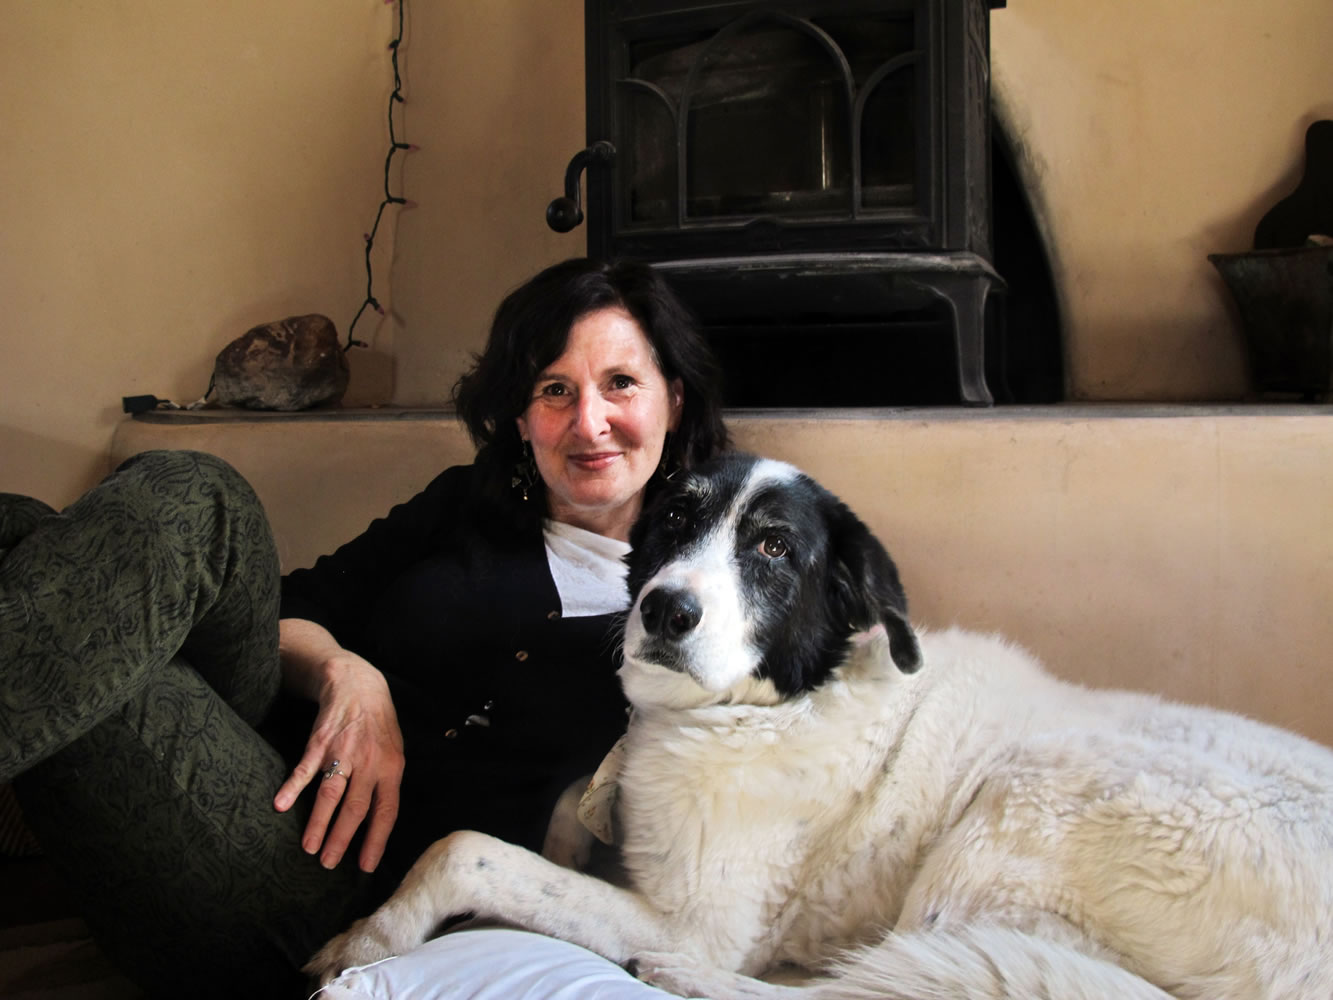 Heidi Schulman says her rescue dog, Bosco, inspired her to develop &quot;The Original Dog Tarot: Divine the Canine Mind&quot; to help people better connect with their pets.